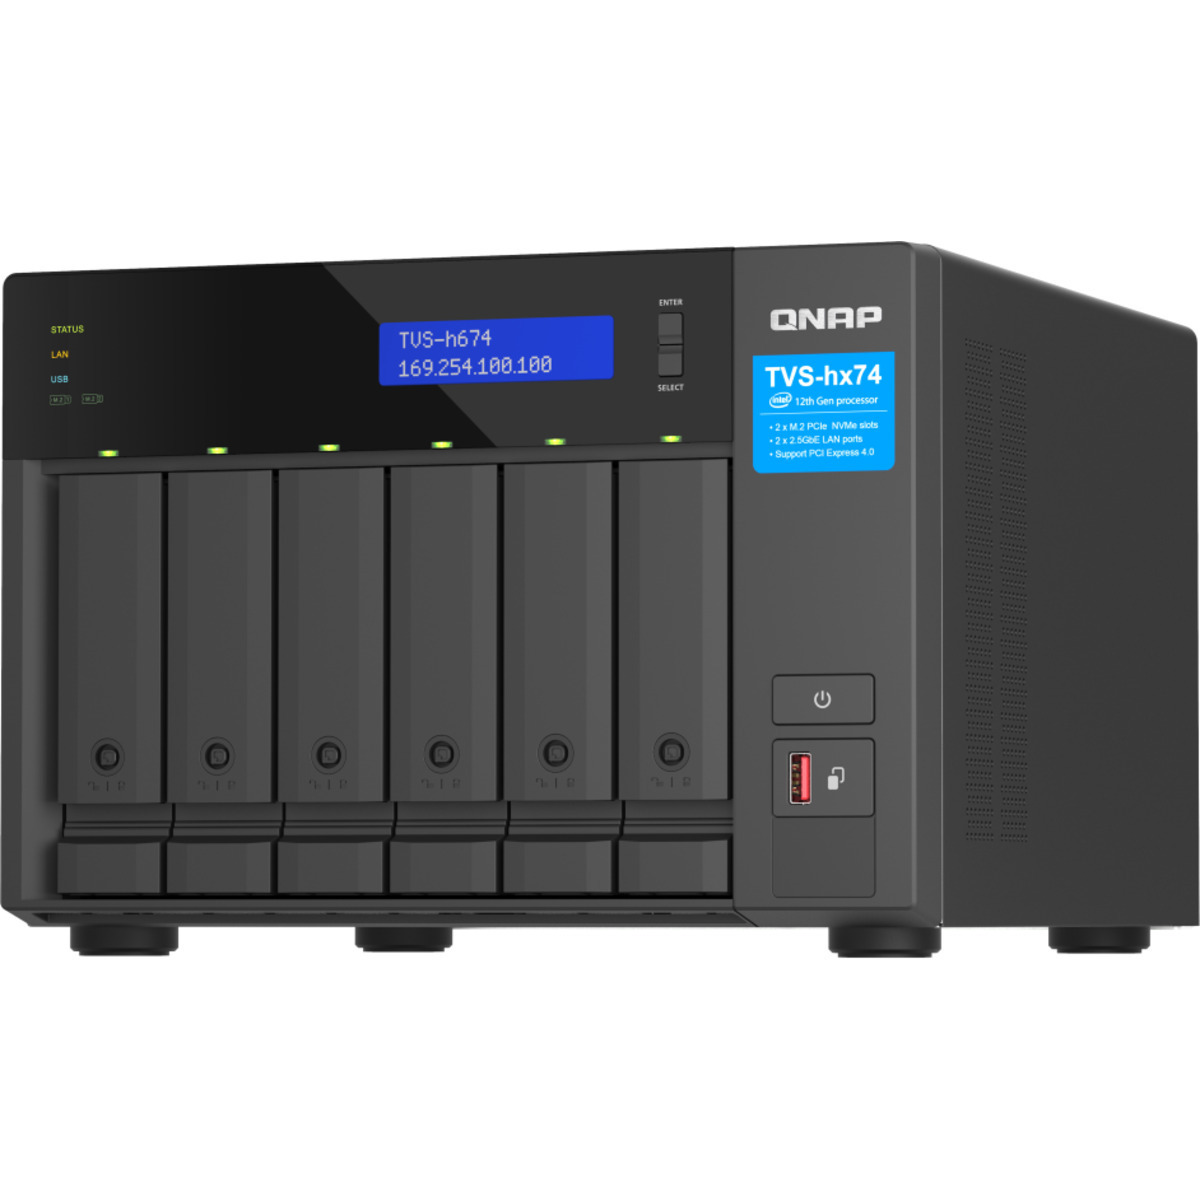 QNAP TVS-h674 Core i3 90tb 6-Bay Desktop Multimedia / Power User / Business NAS - Network Attached Storage Device 5x18tb Toshiba Enterprise Capacity MG09ACA18TE 3.5 7200rpm SATA 6Gb/s HDD ENTERPRISE Class Drives Installed - Burn-In Tested TVS-h674 Core i3